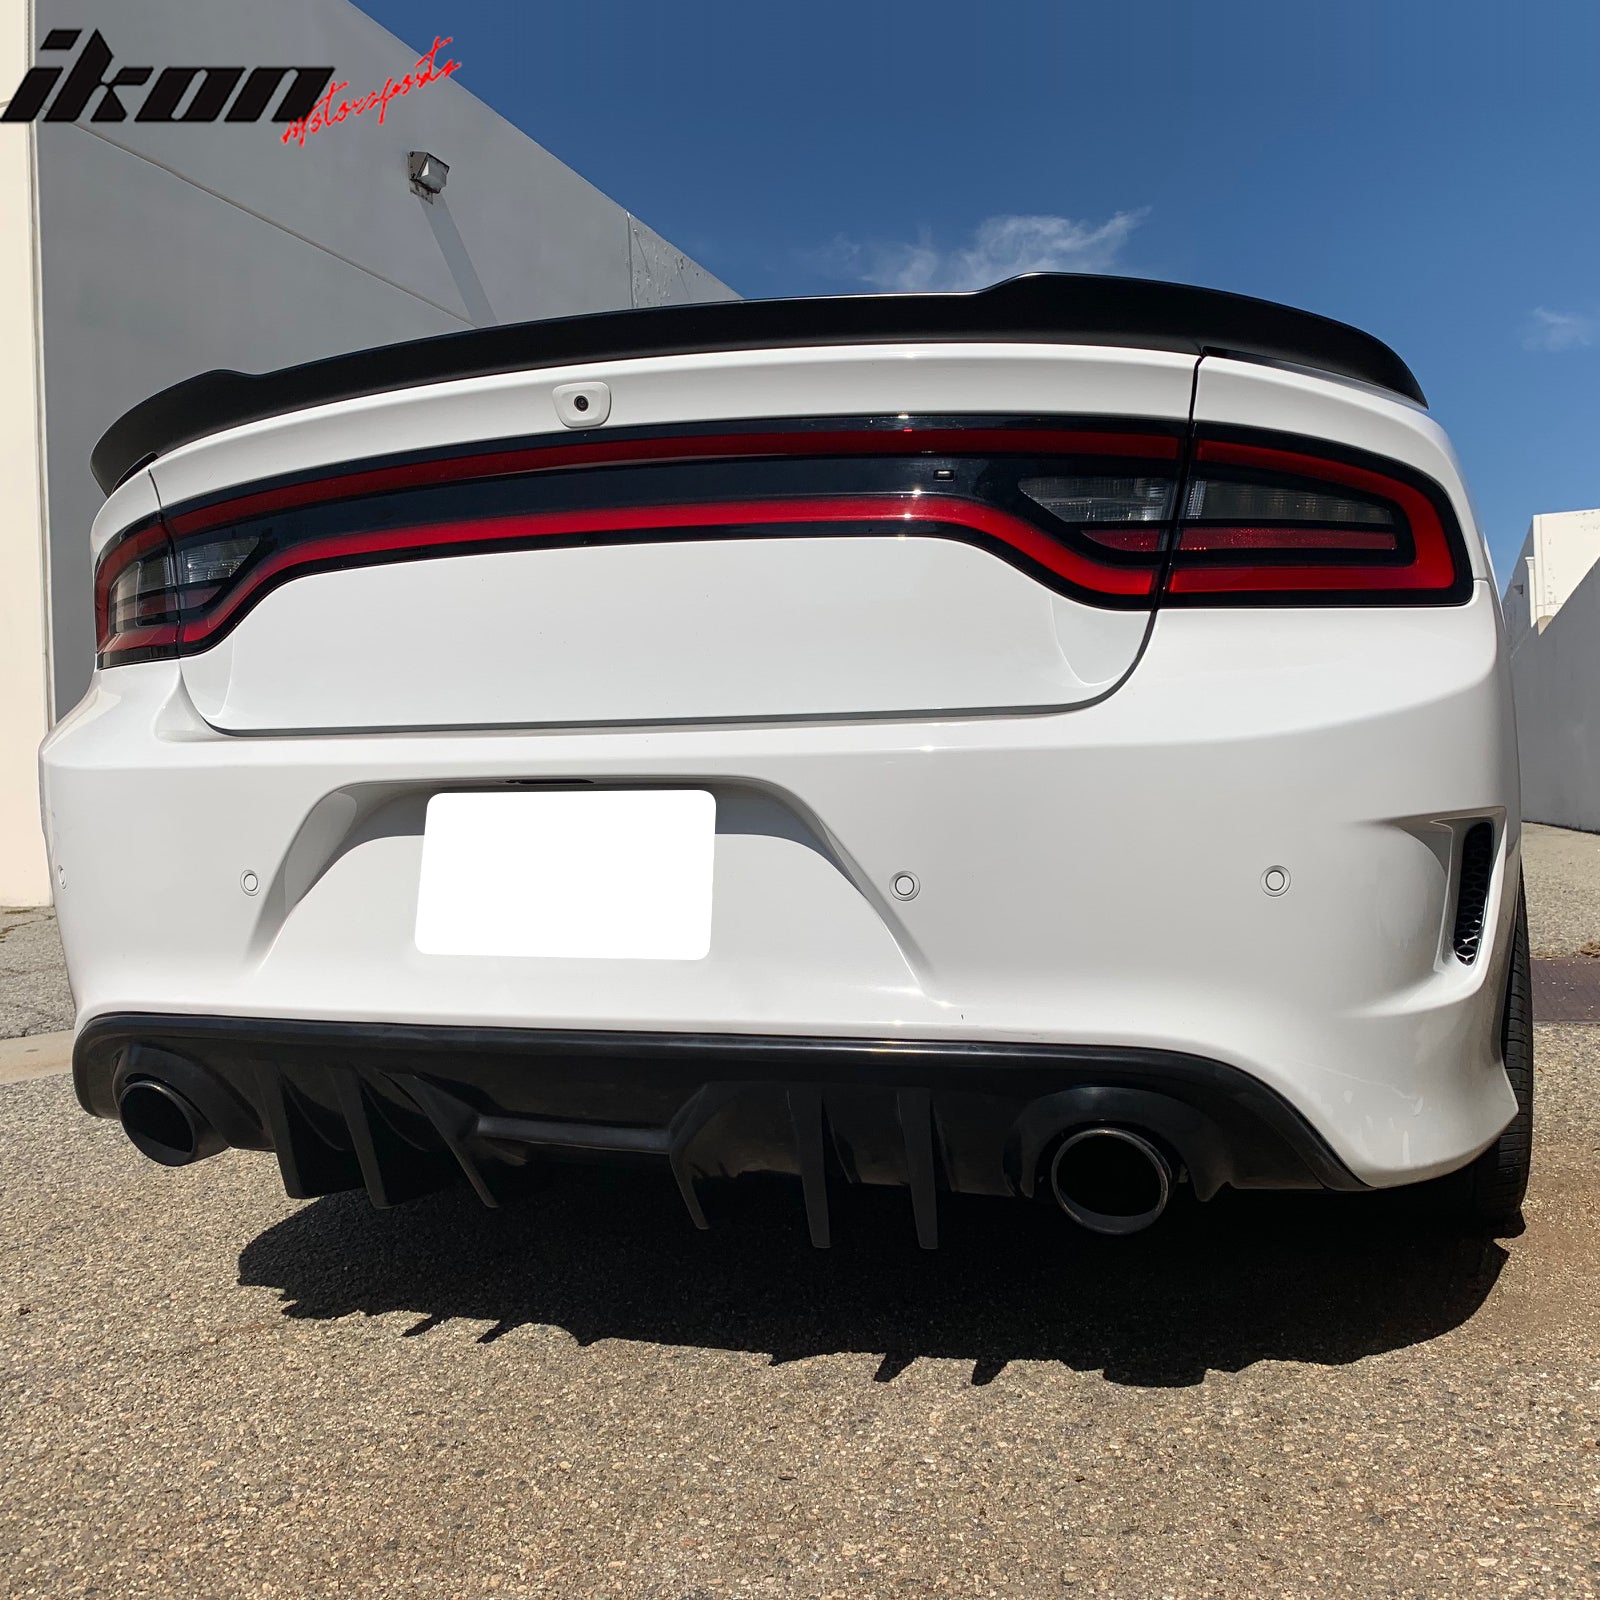 IKON MOTORSPORTS Rear Diffuser, Compatible with 2015-2020 Dodge Charger SRT Scat Pack, MDP V2 Style Unpainted PU Shark Fin Rear Bumper Valance Spoiler, Air Dam Chin Splitter Molding 1Piece